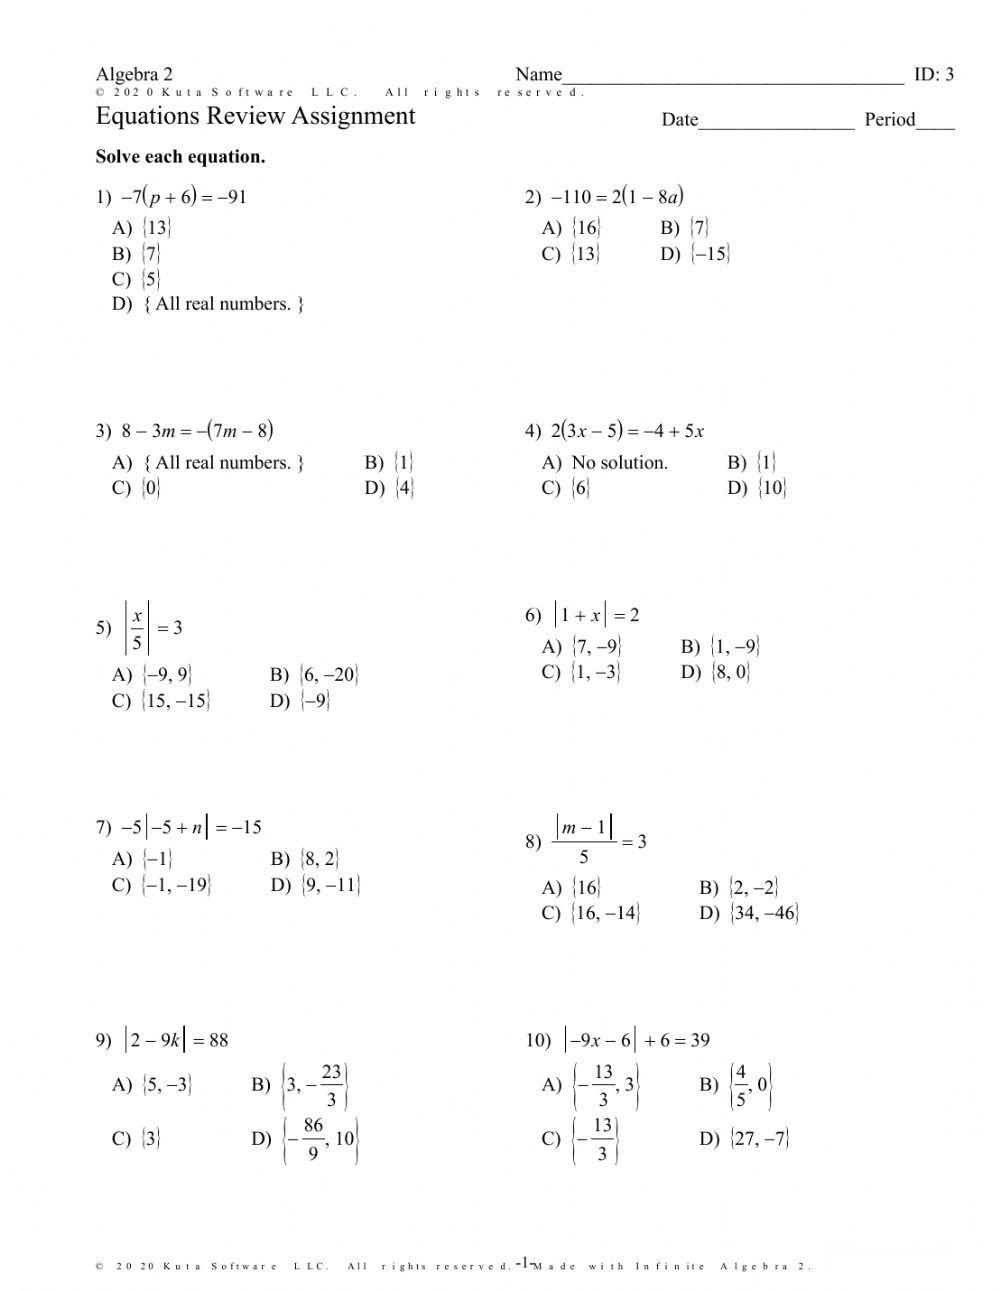 Solving Equations, Inequalities, and Absolute Value